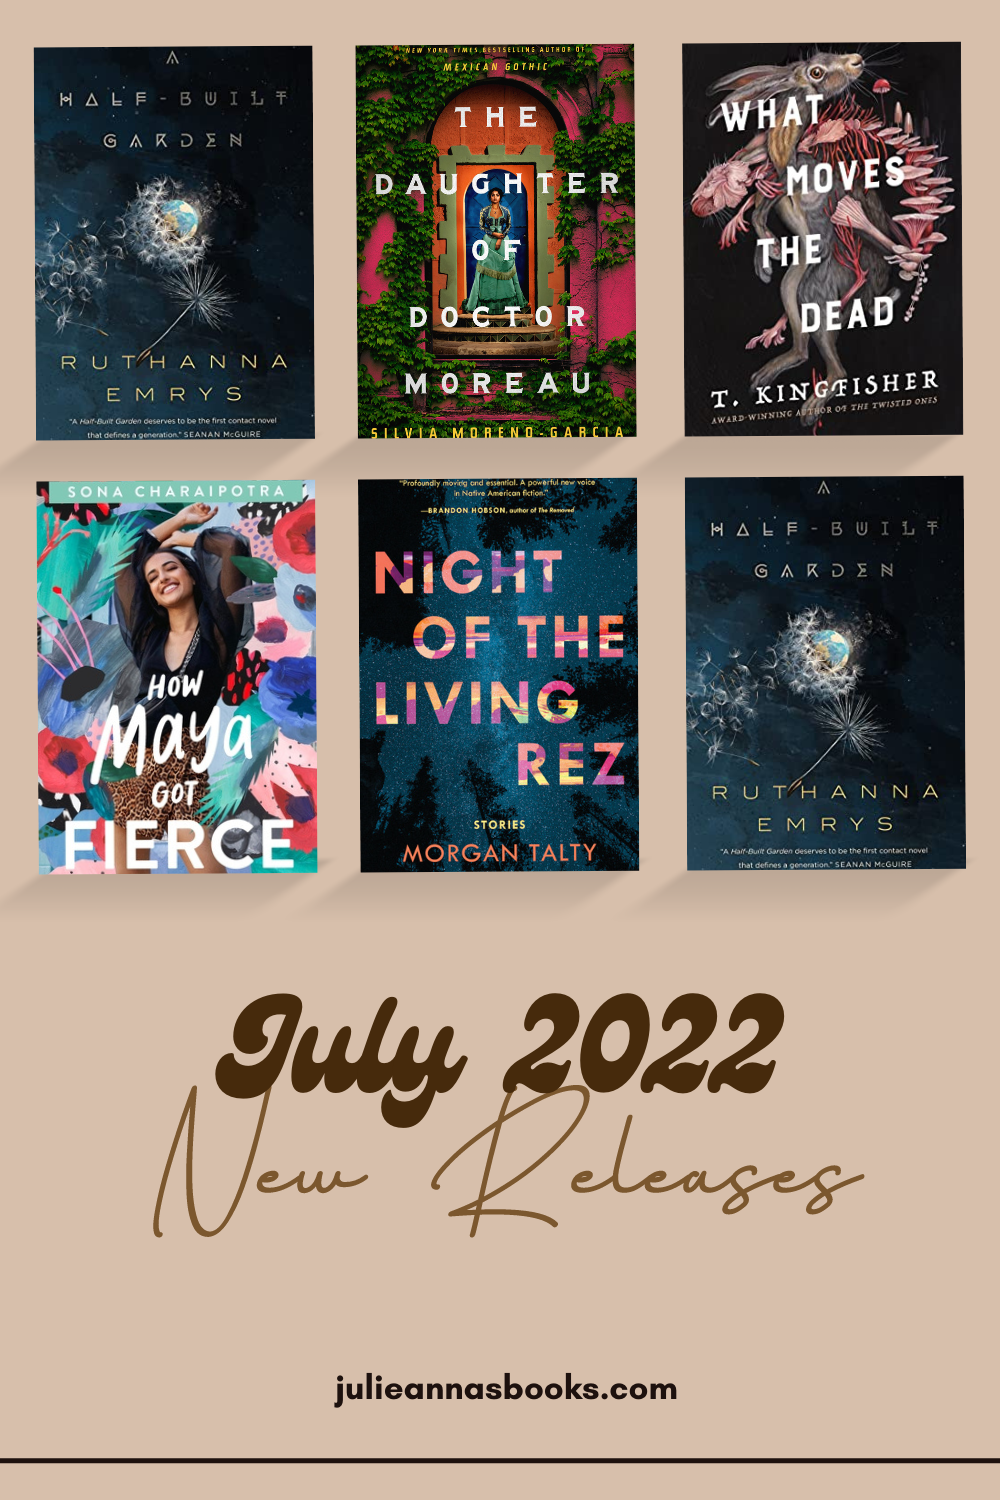 July 2022 Anticipated Releases